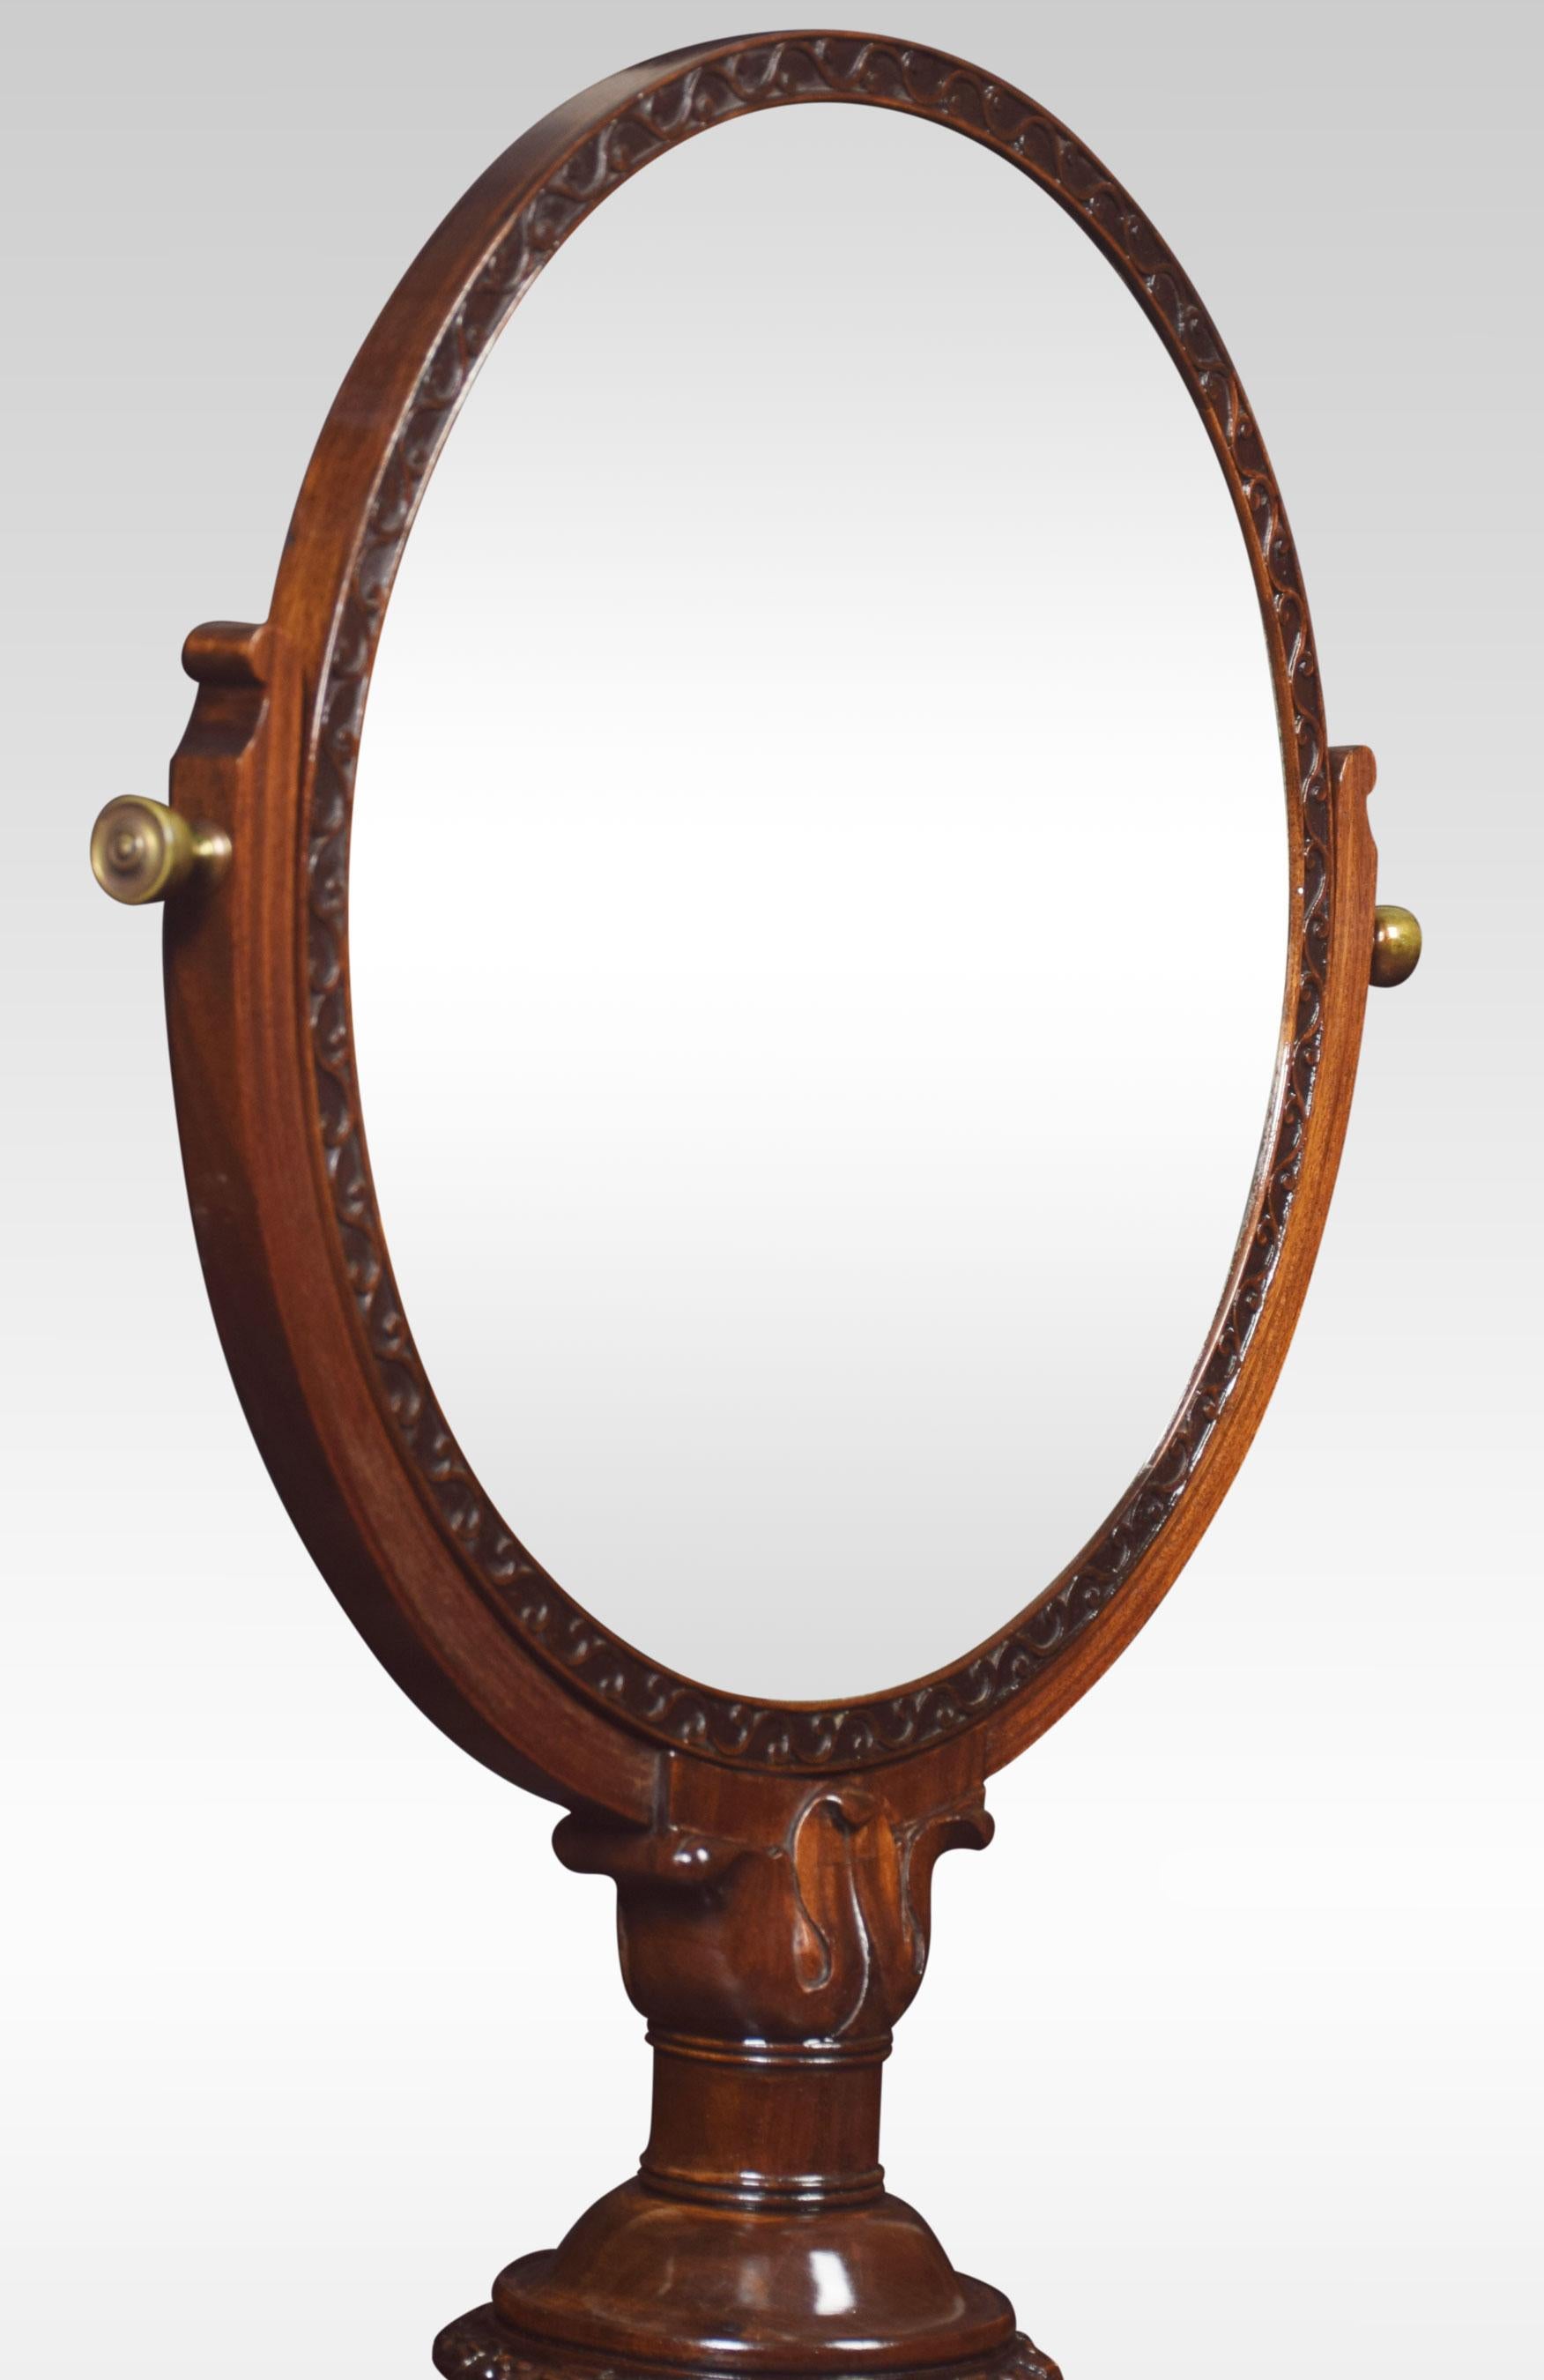 Mahogany shaving/dressing table mirror, with adjustable circular mirror within moulded carved surround over lobed baluster upright, on a circular base.
Dimensions:
Height 28 inches
Width 24 inches
Depth 11.5 inches.